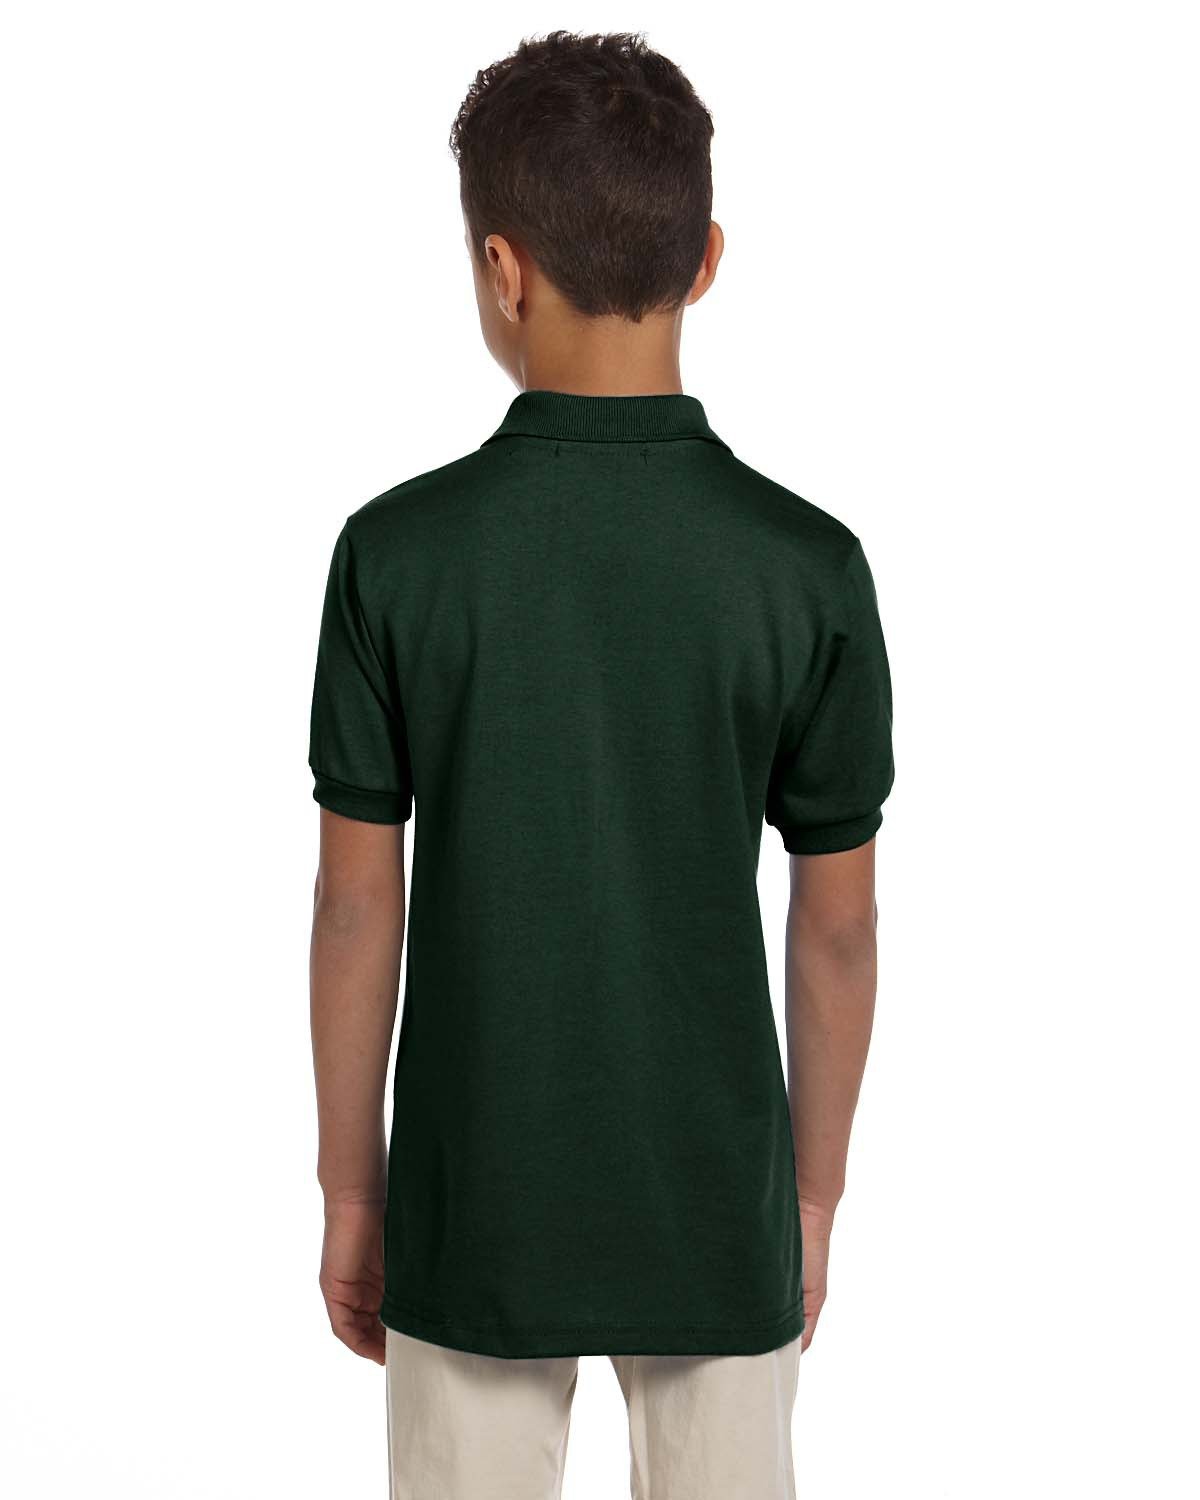 437Y-Jerzees-FOREST GREEN-Jerzees-Polos-2